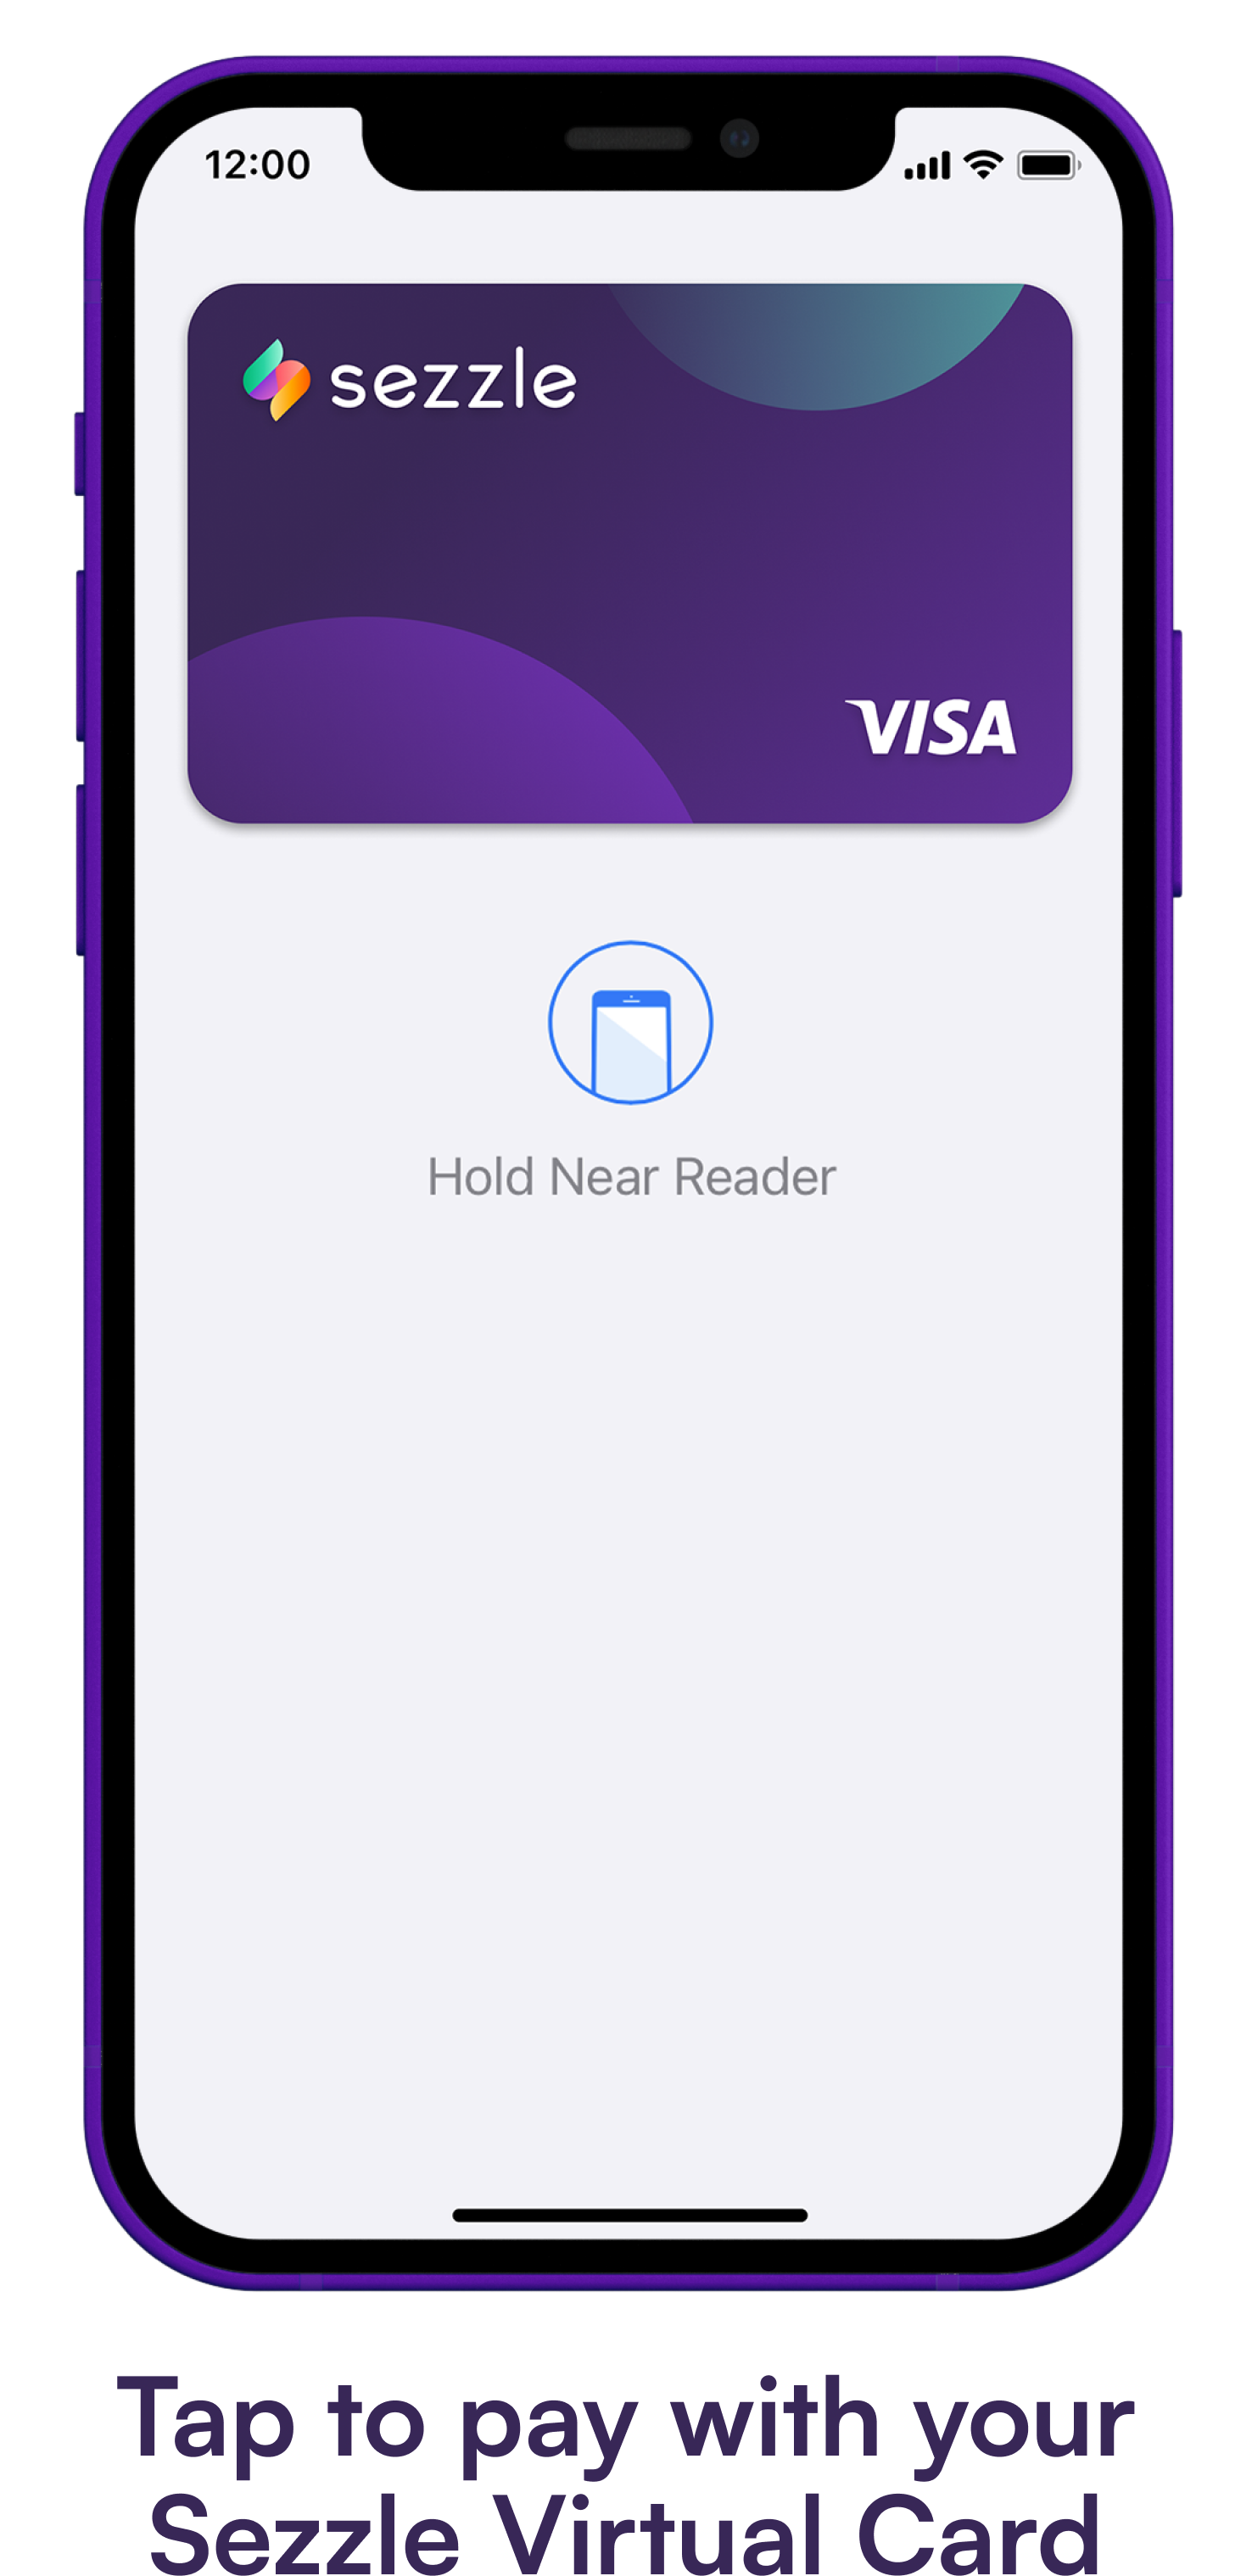 Phone screen showing the Sezzle Virtual Card in the Apple Wallet